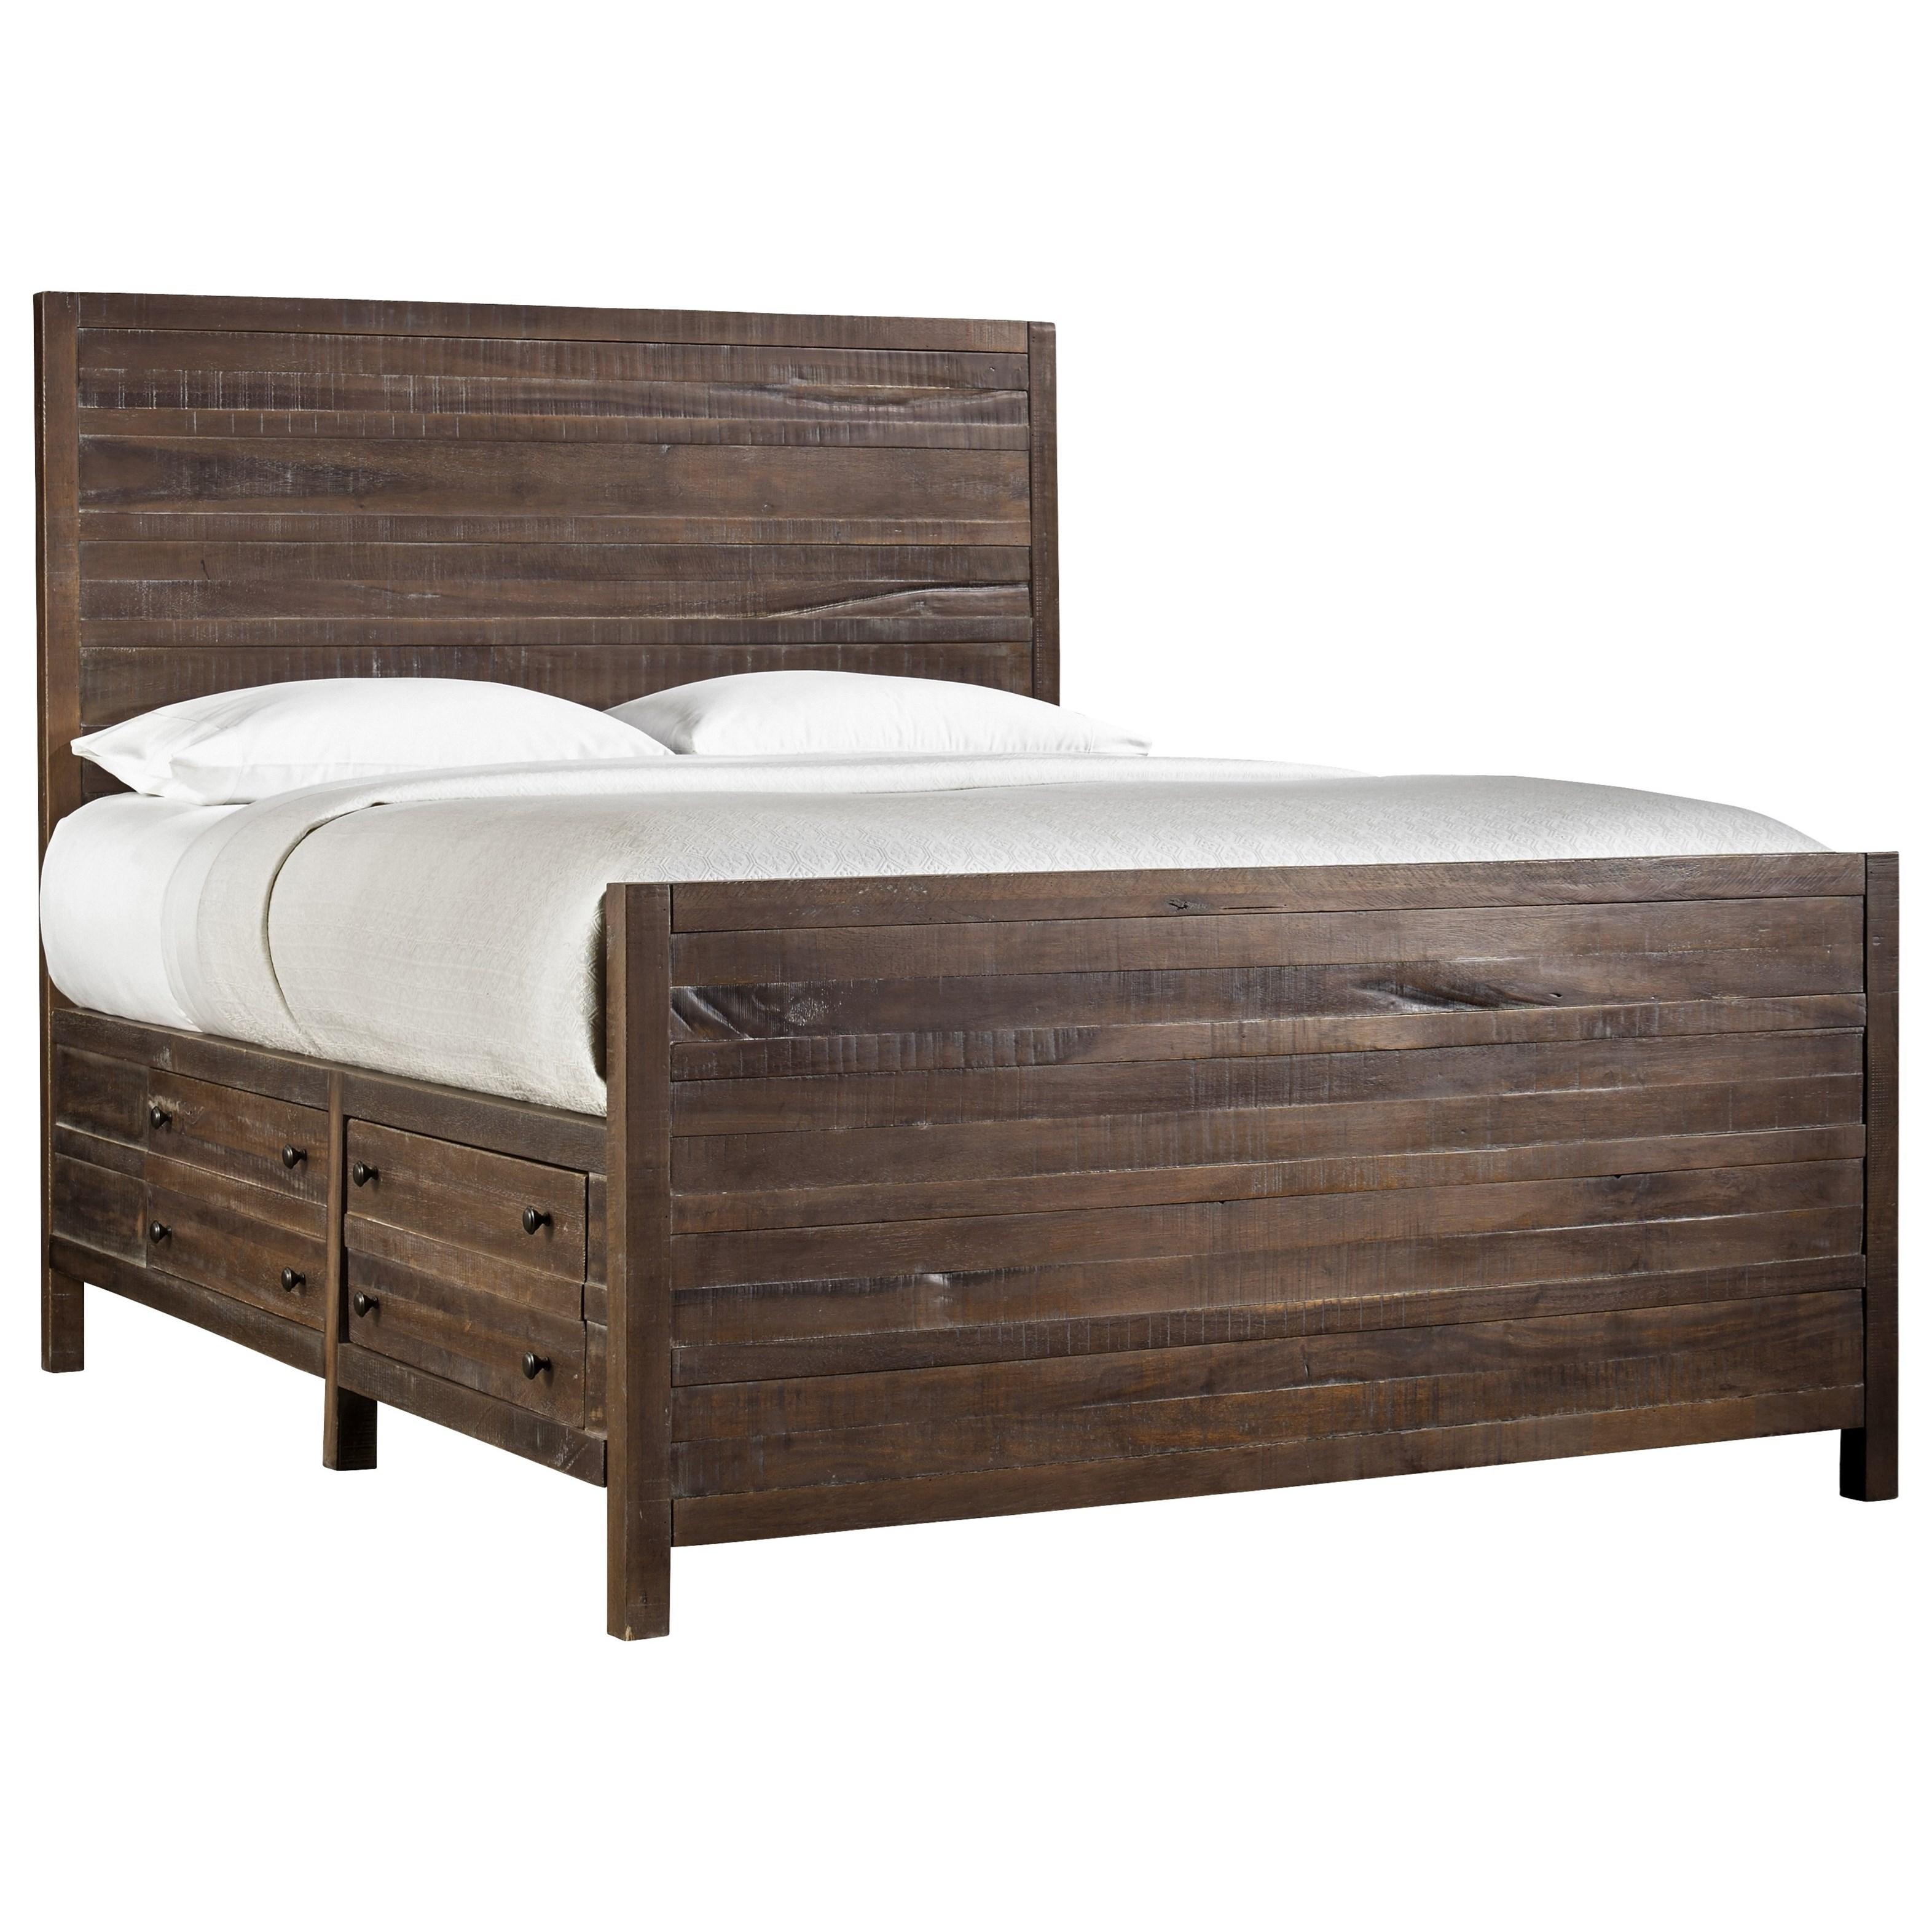 Contemporary Storage Bed TOWNSEND 8T06D5 in Java 